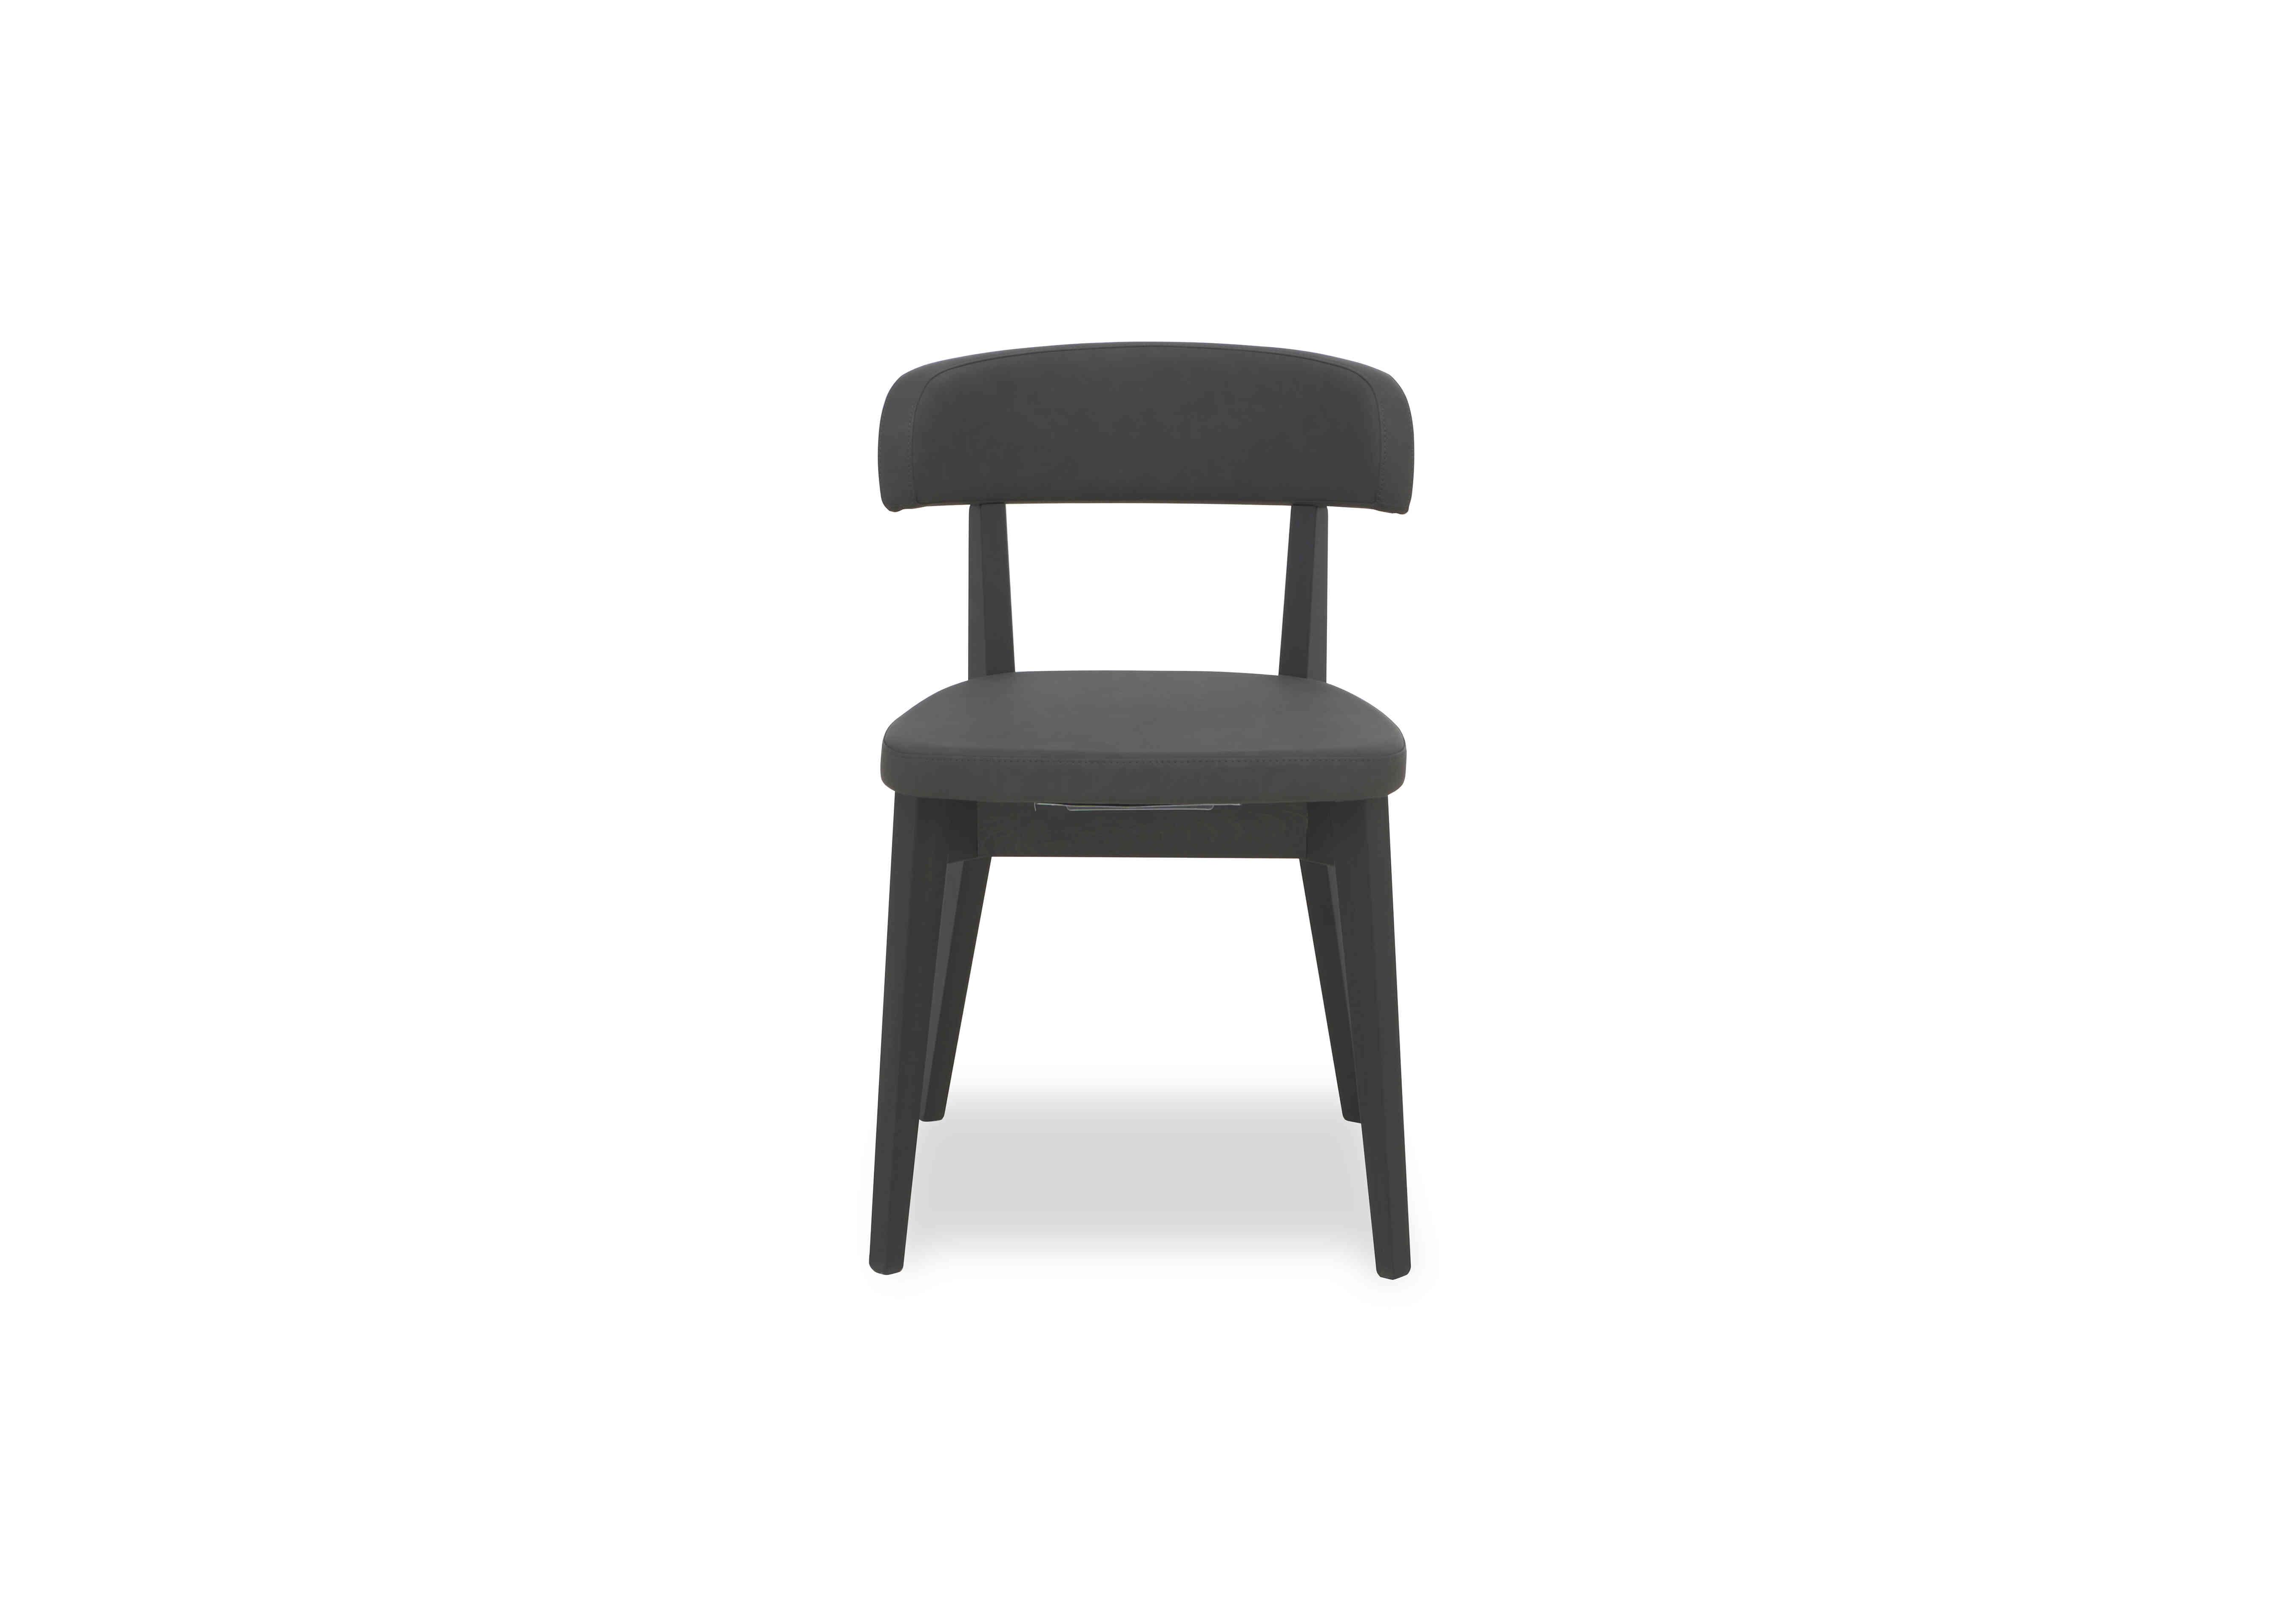 Lord Siren Dining Chair in Vintage Ash Grey/Graphite on Furniture Village